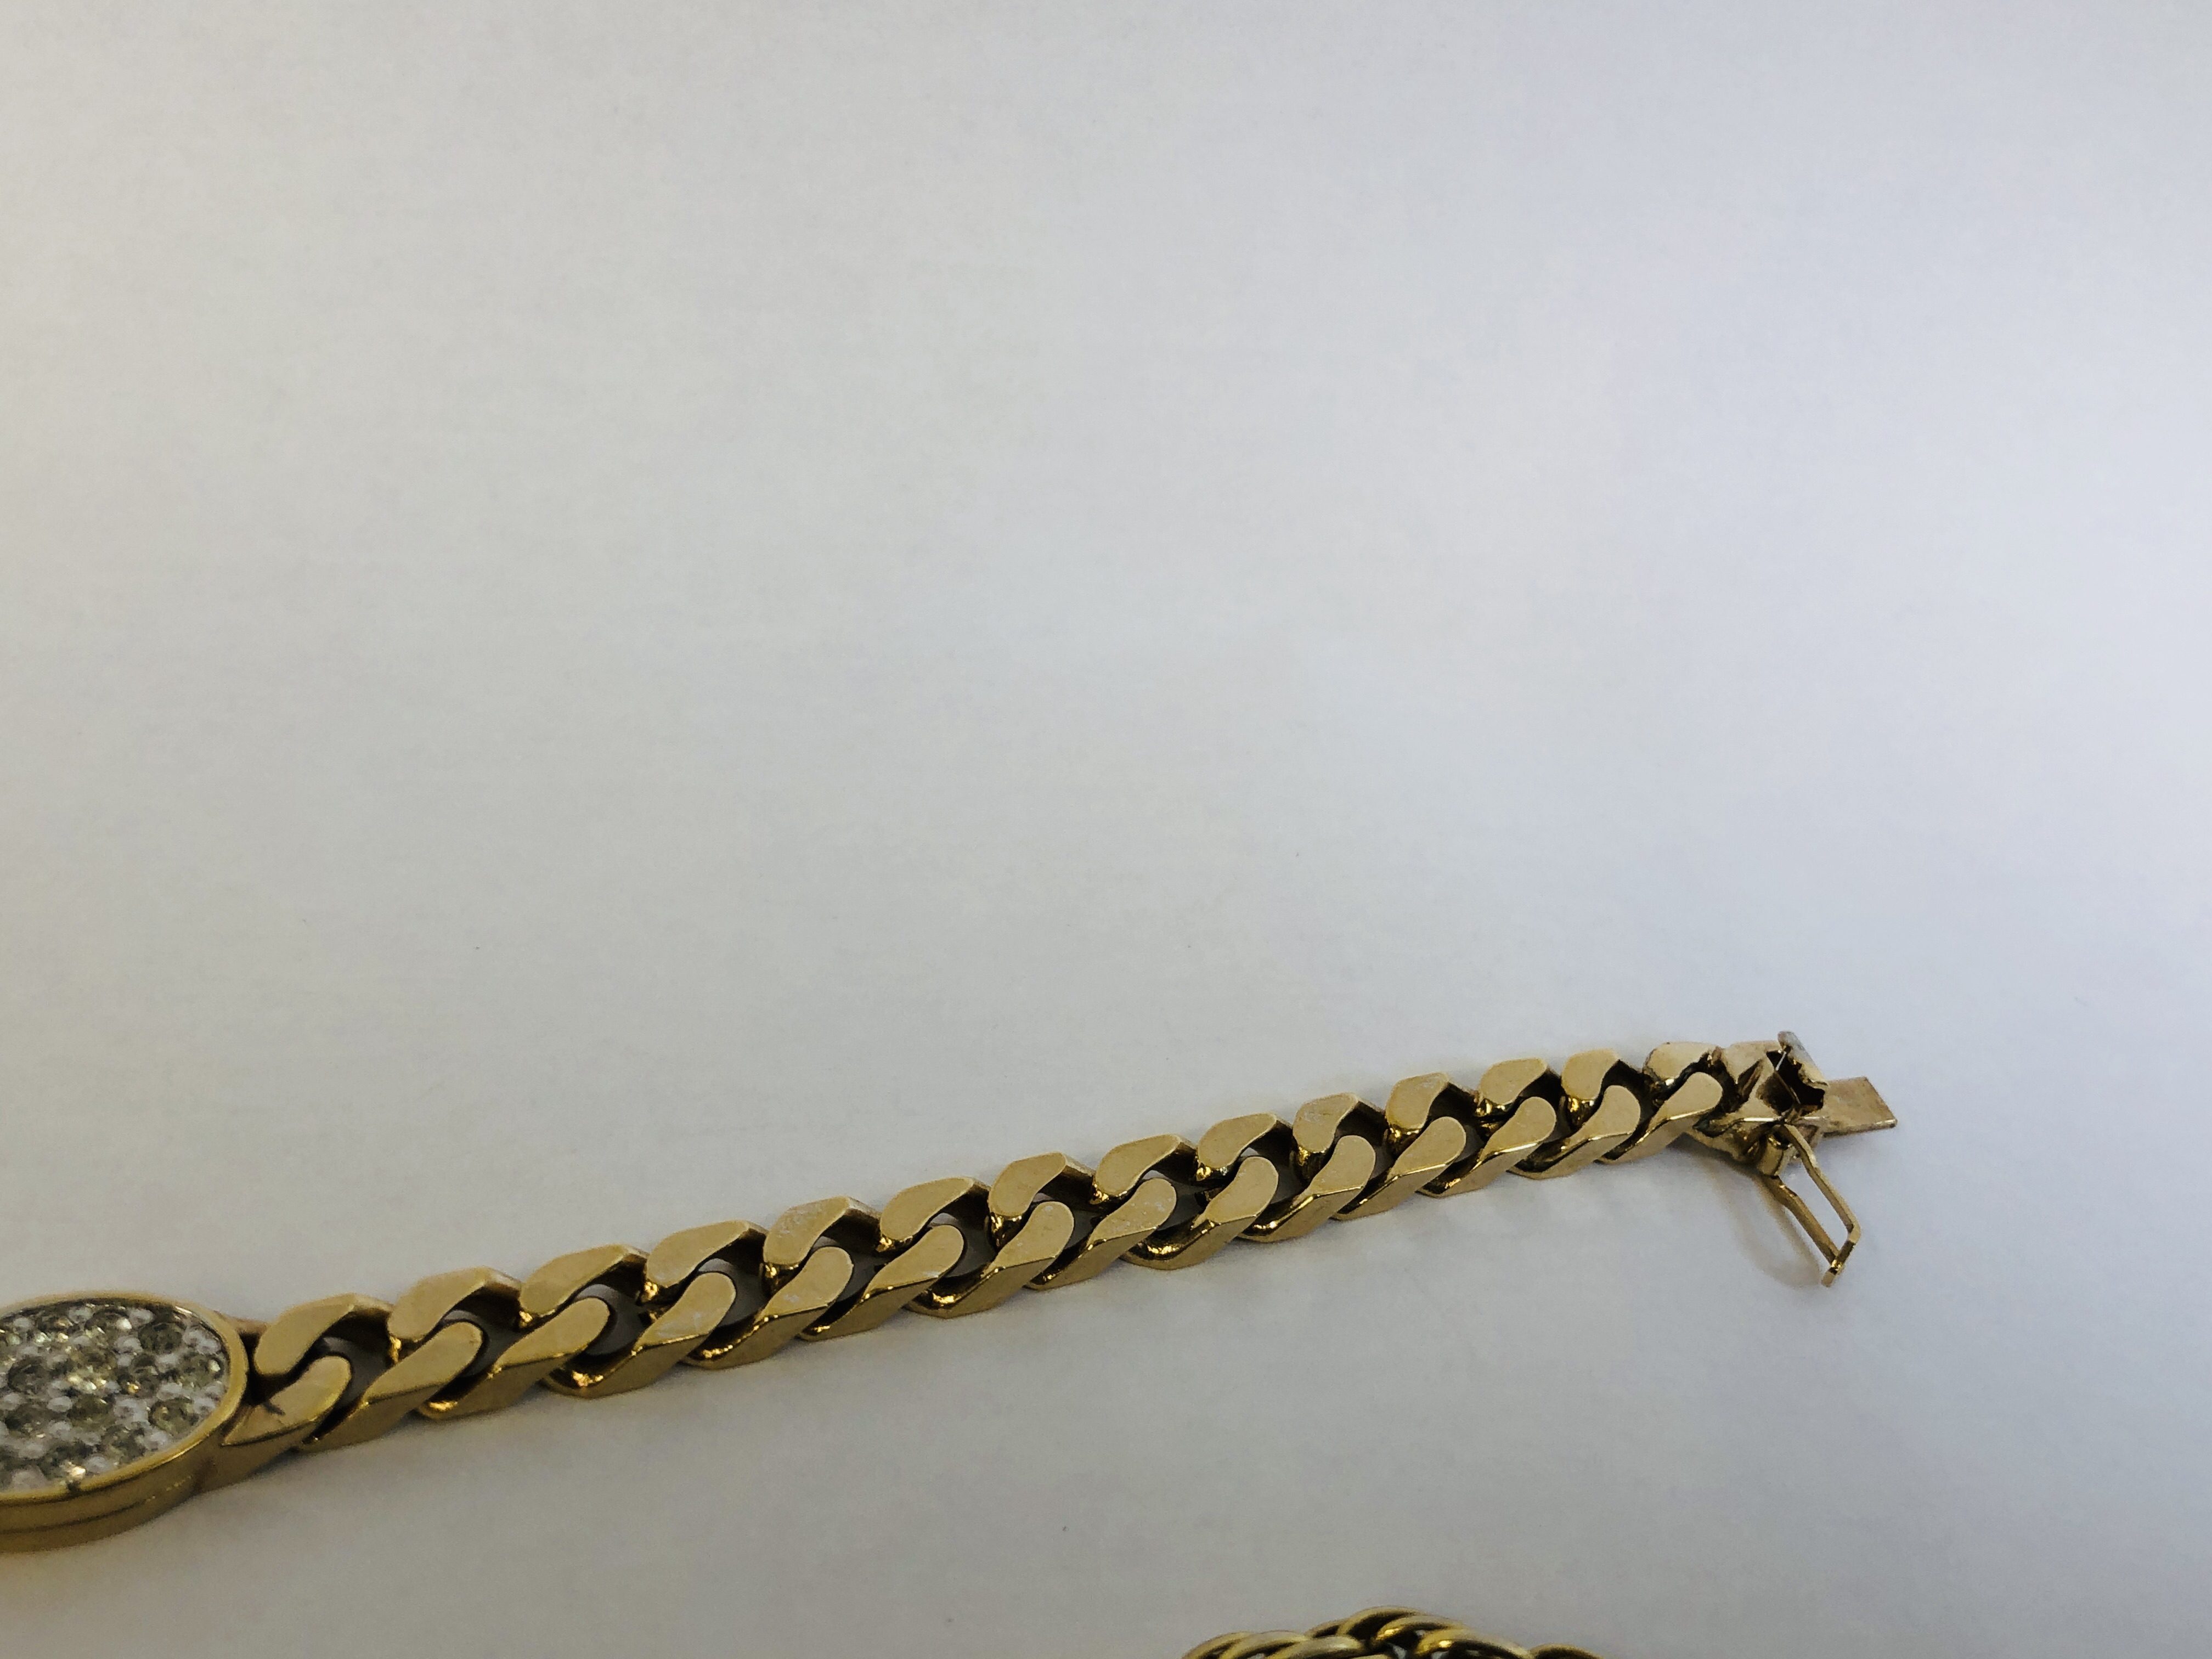 A GOLD TONE COSTUME BRACELET MARKED "PANETTA" ALONG WITH AN UNMARKED ROPE TWIST NECKLACE. - Image 7 of 13